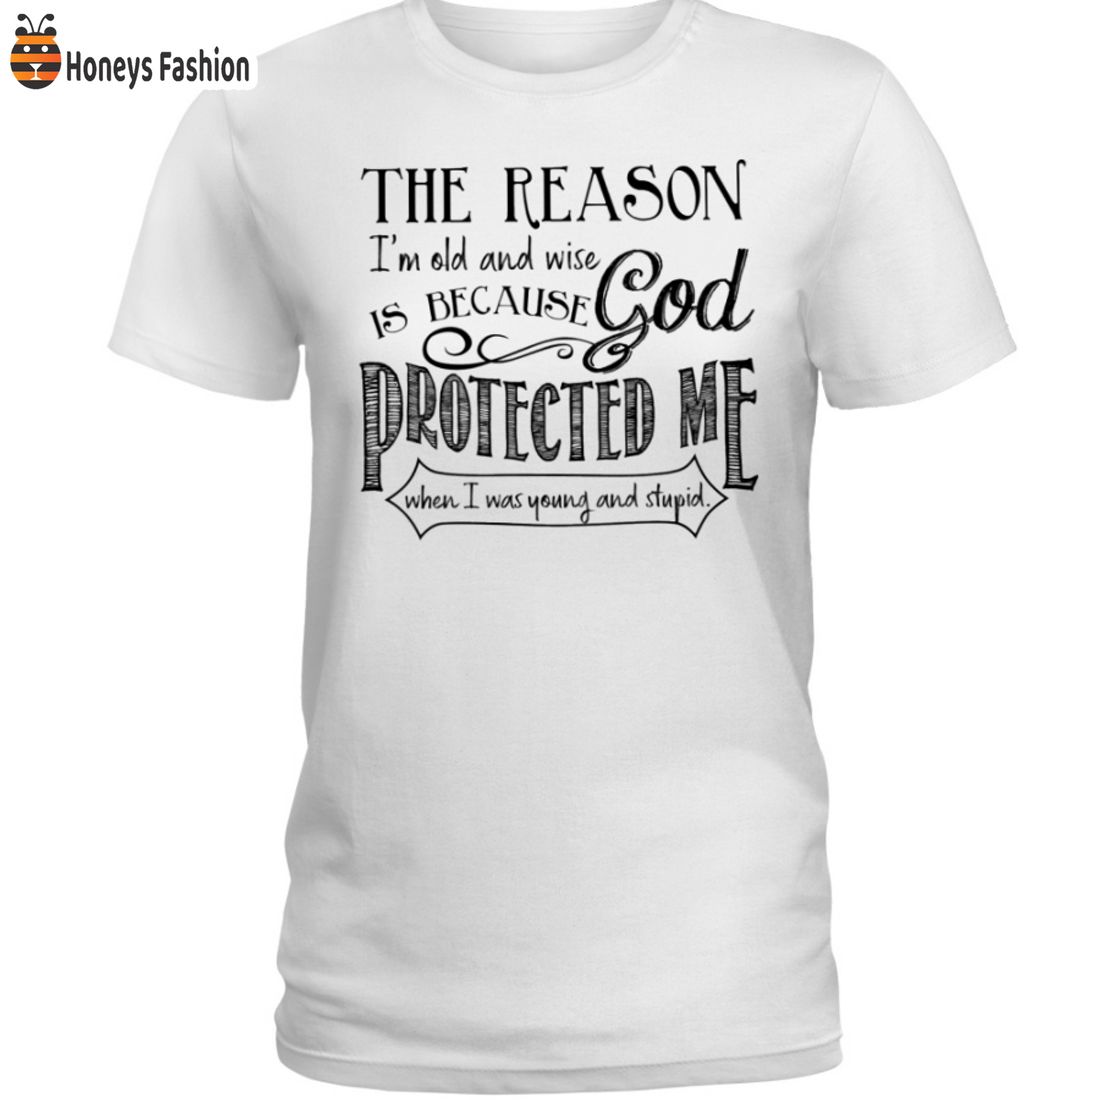 BEST SELLER The Reason I’m Old And Wise Is Because God Protected Me When I Was Young And Stupid Shirt